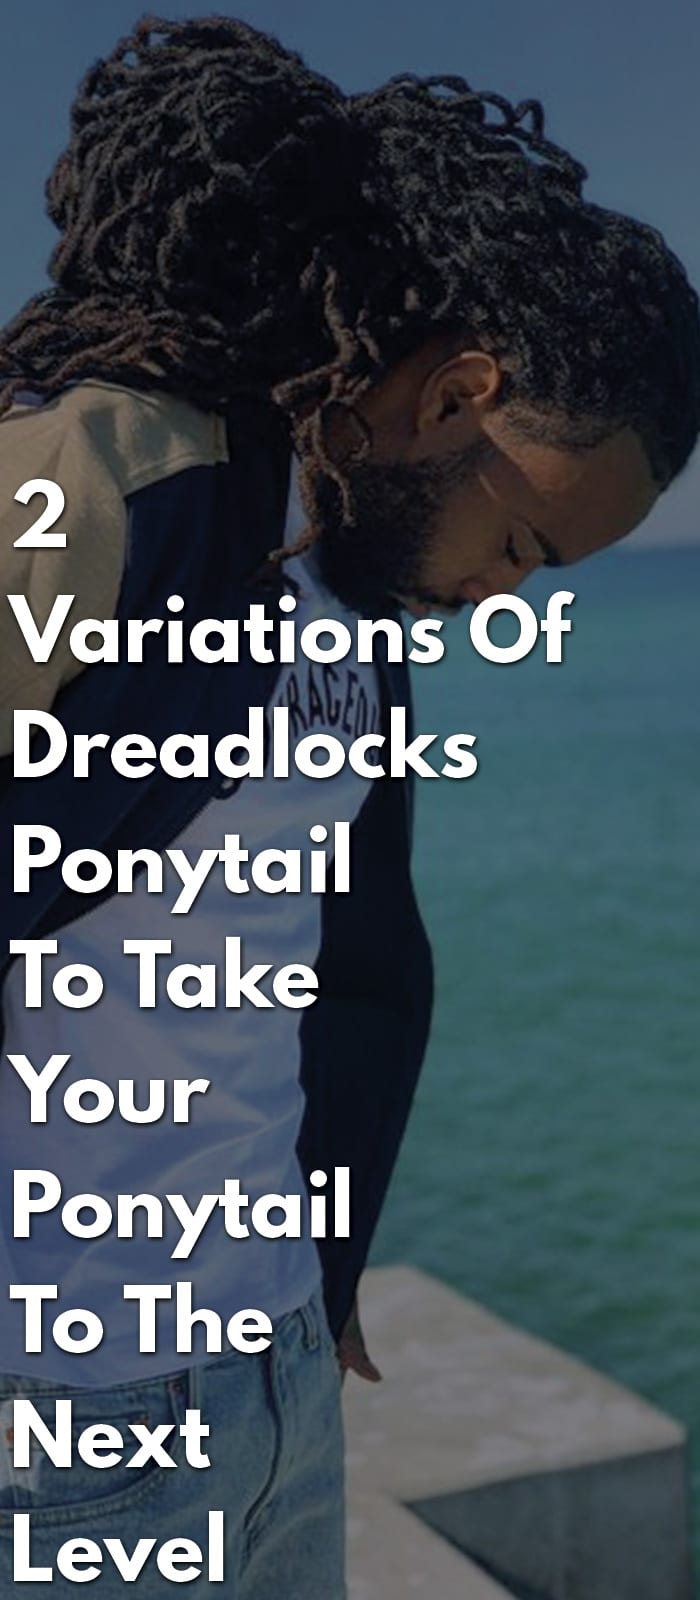 2 Variations Of Dreadlocks Ponytail To Take Your Ponytail To The Next Level